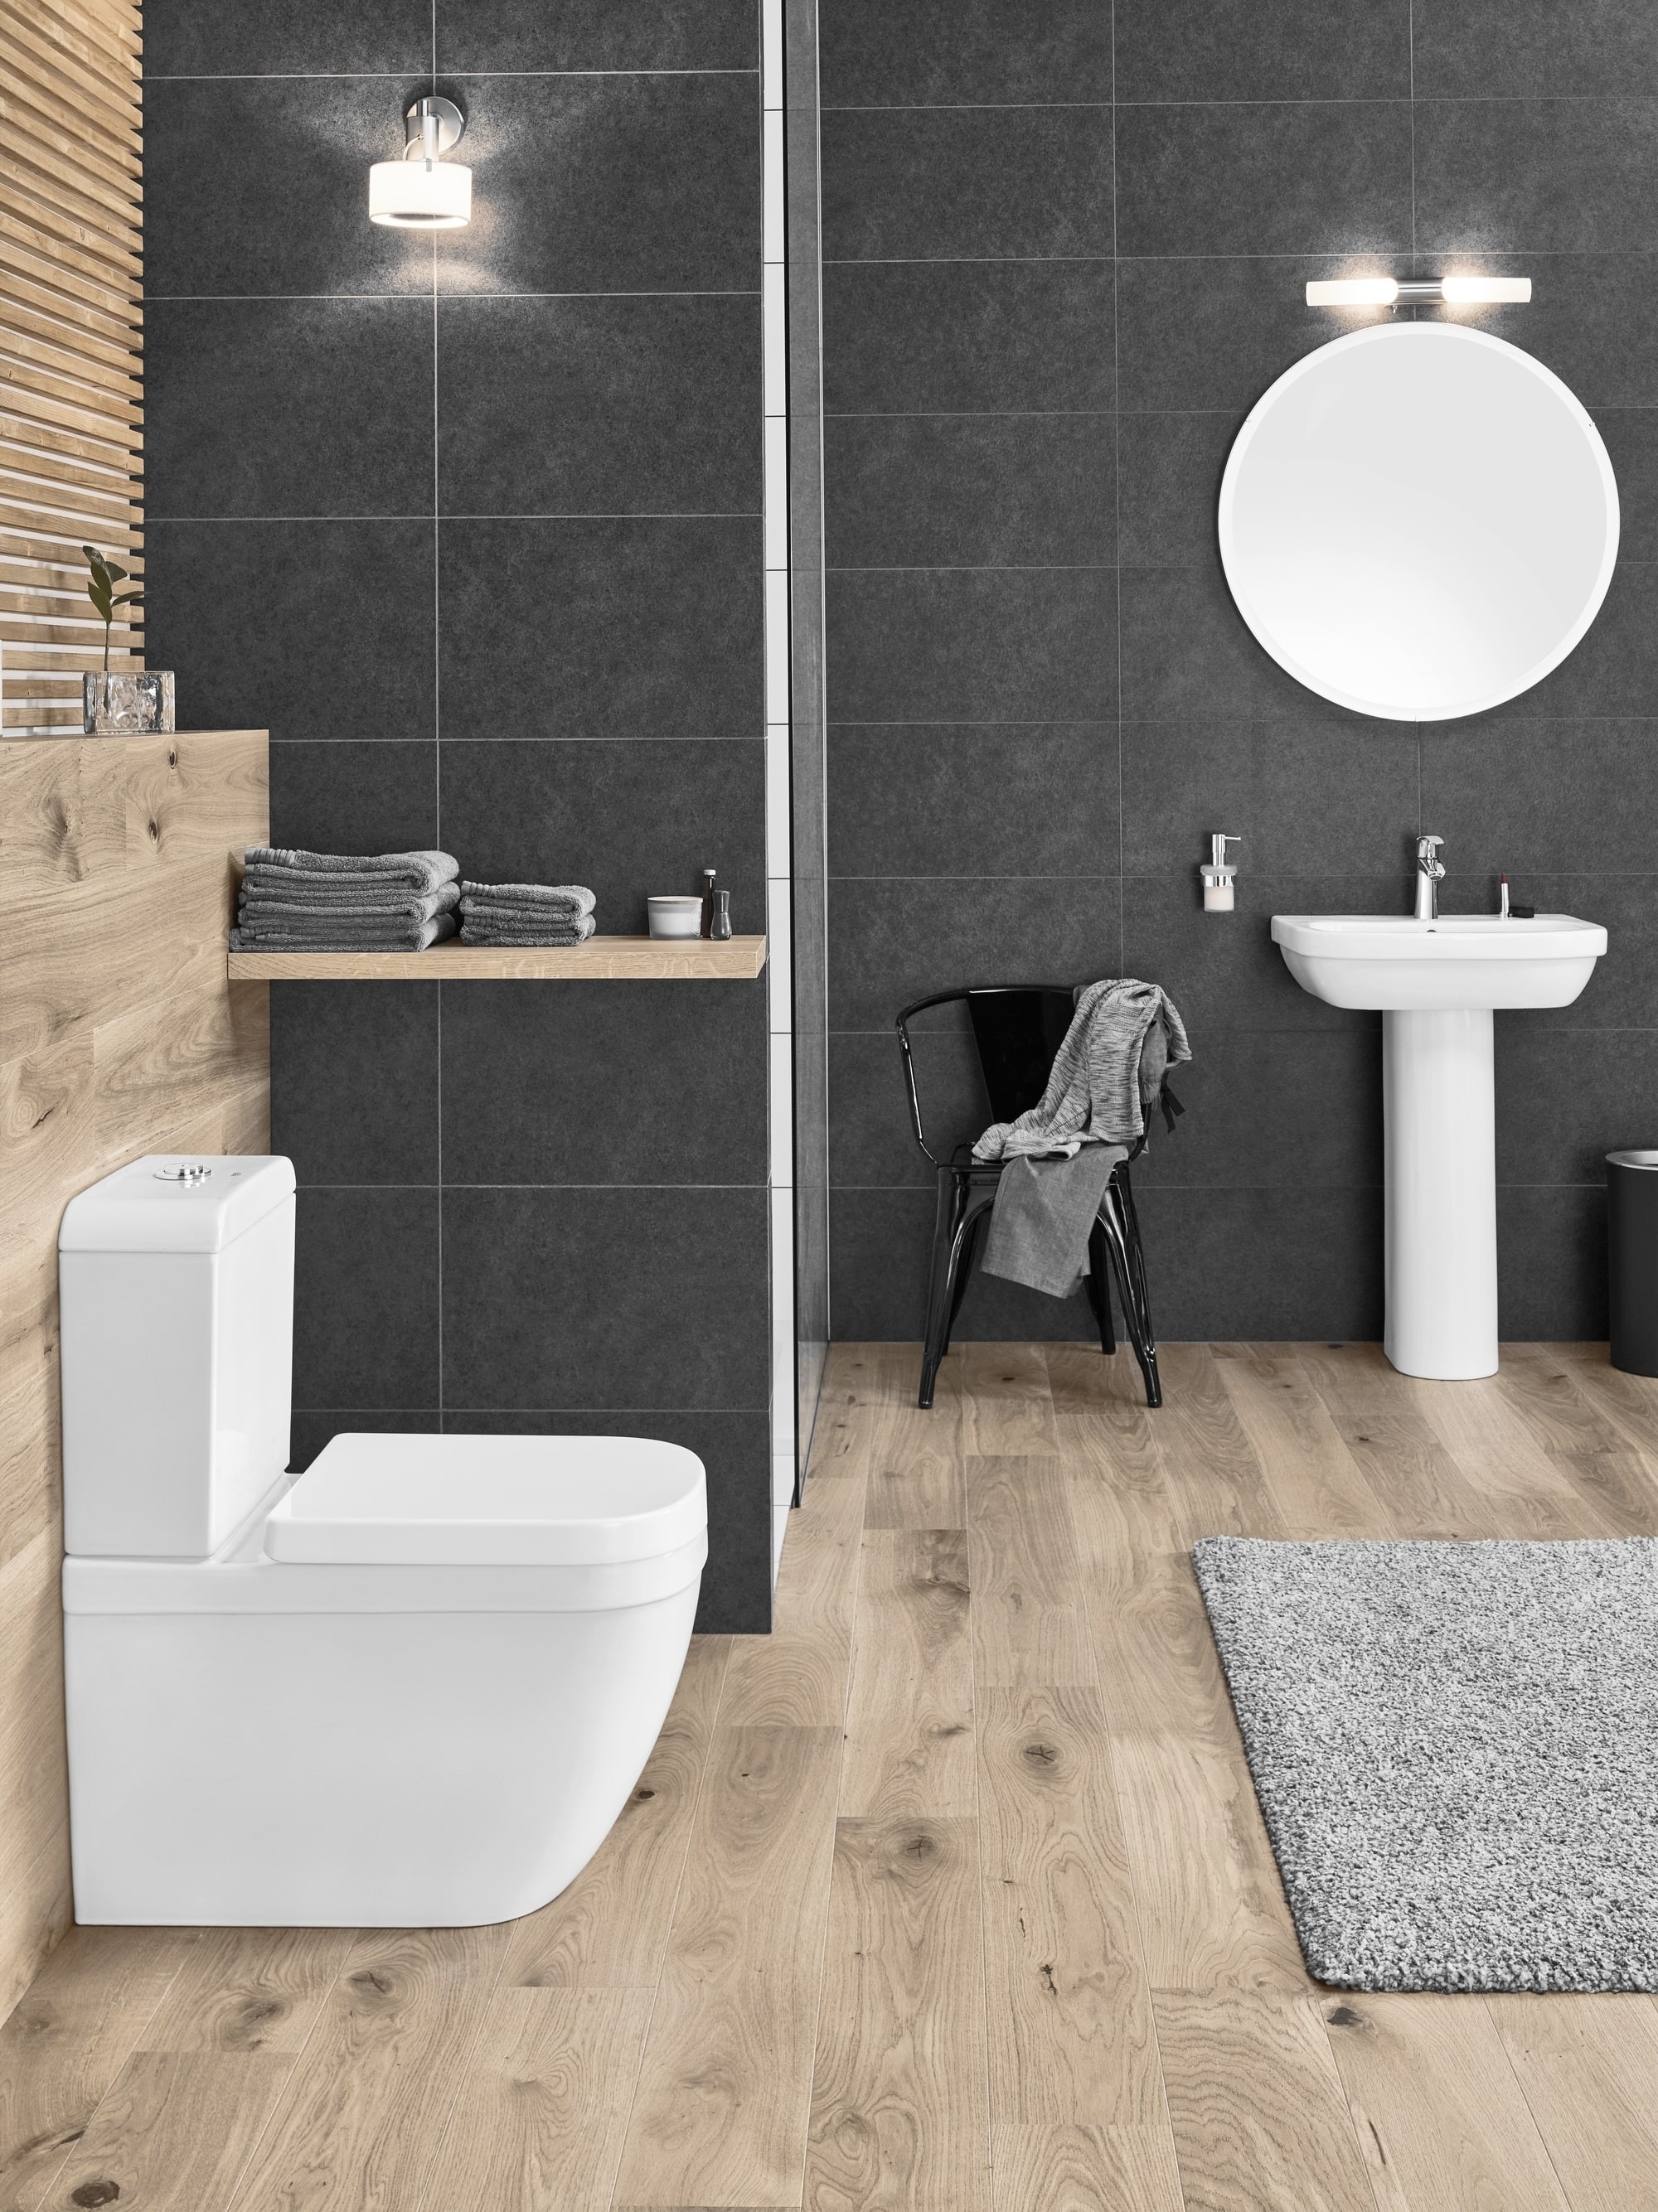  GROHE  Euro  Ceramic  Stand Tiefsp l WC  ohne Sp lrand xTWOstore